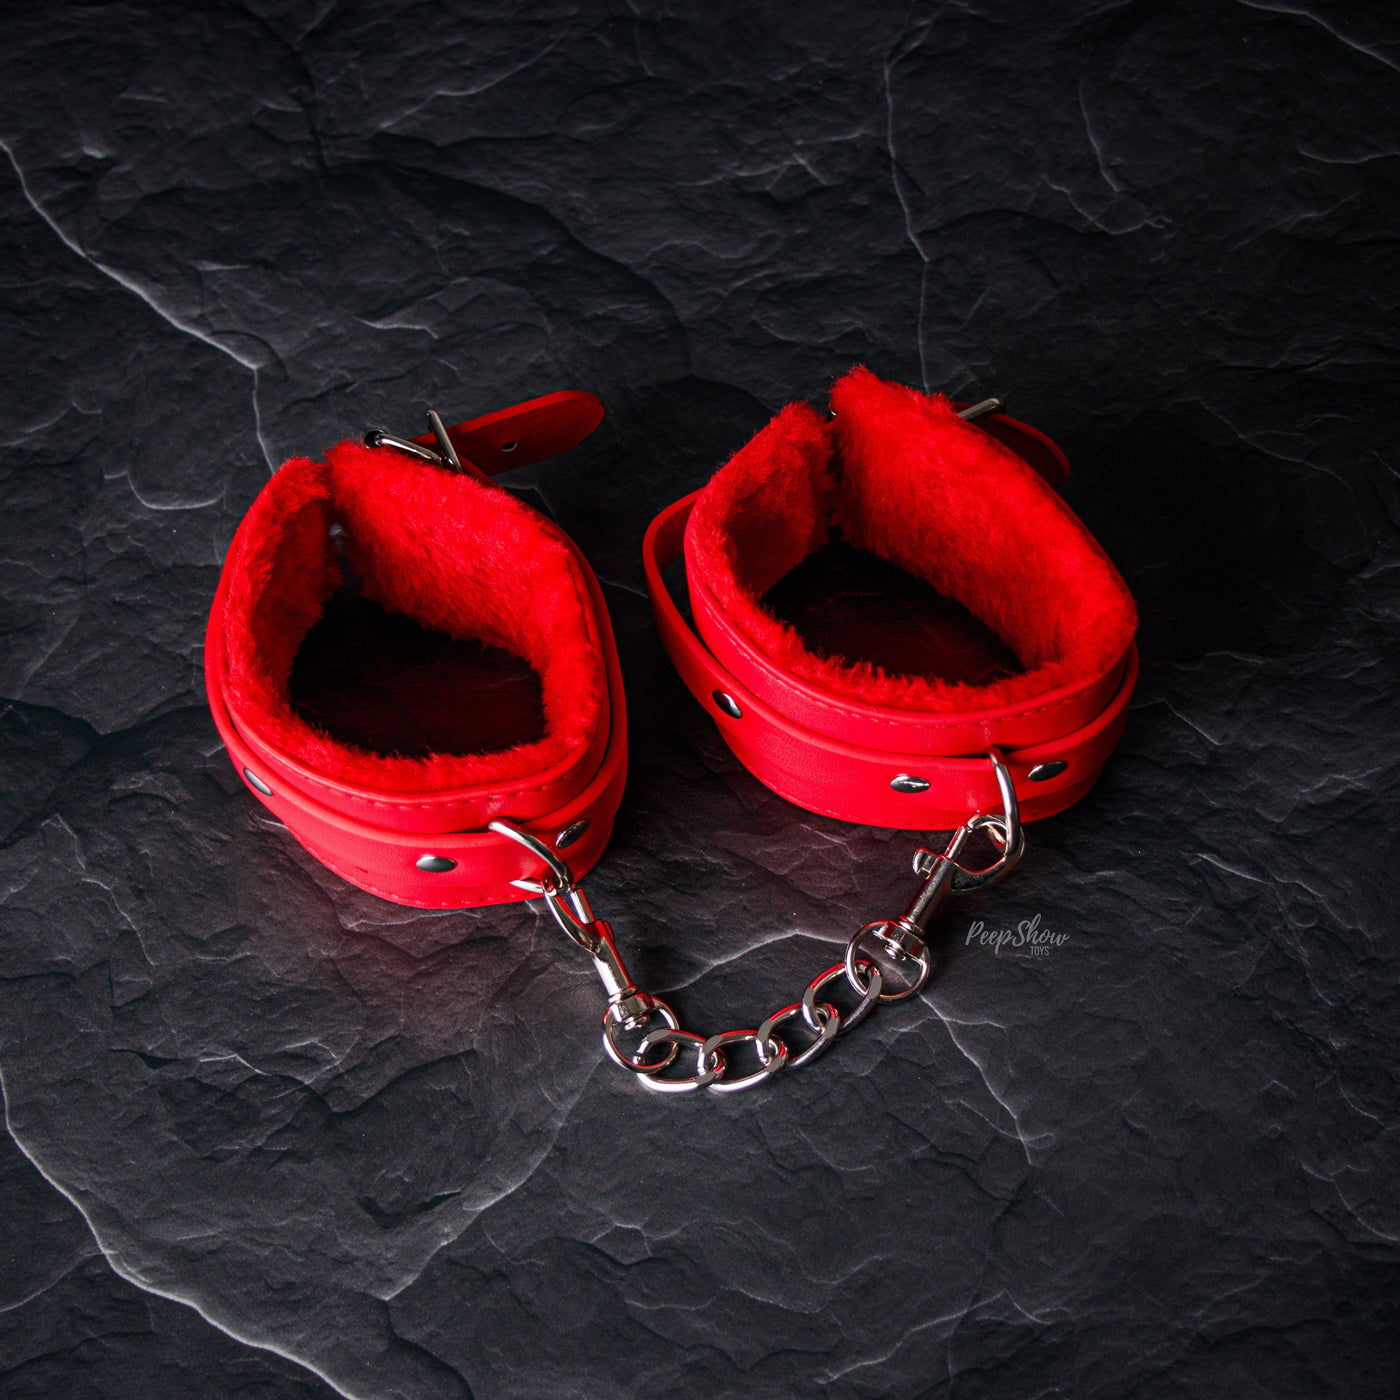 Ouch! Plush Leather Hand Cuffs by Shots - Hamilton Park Electronics